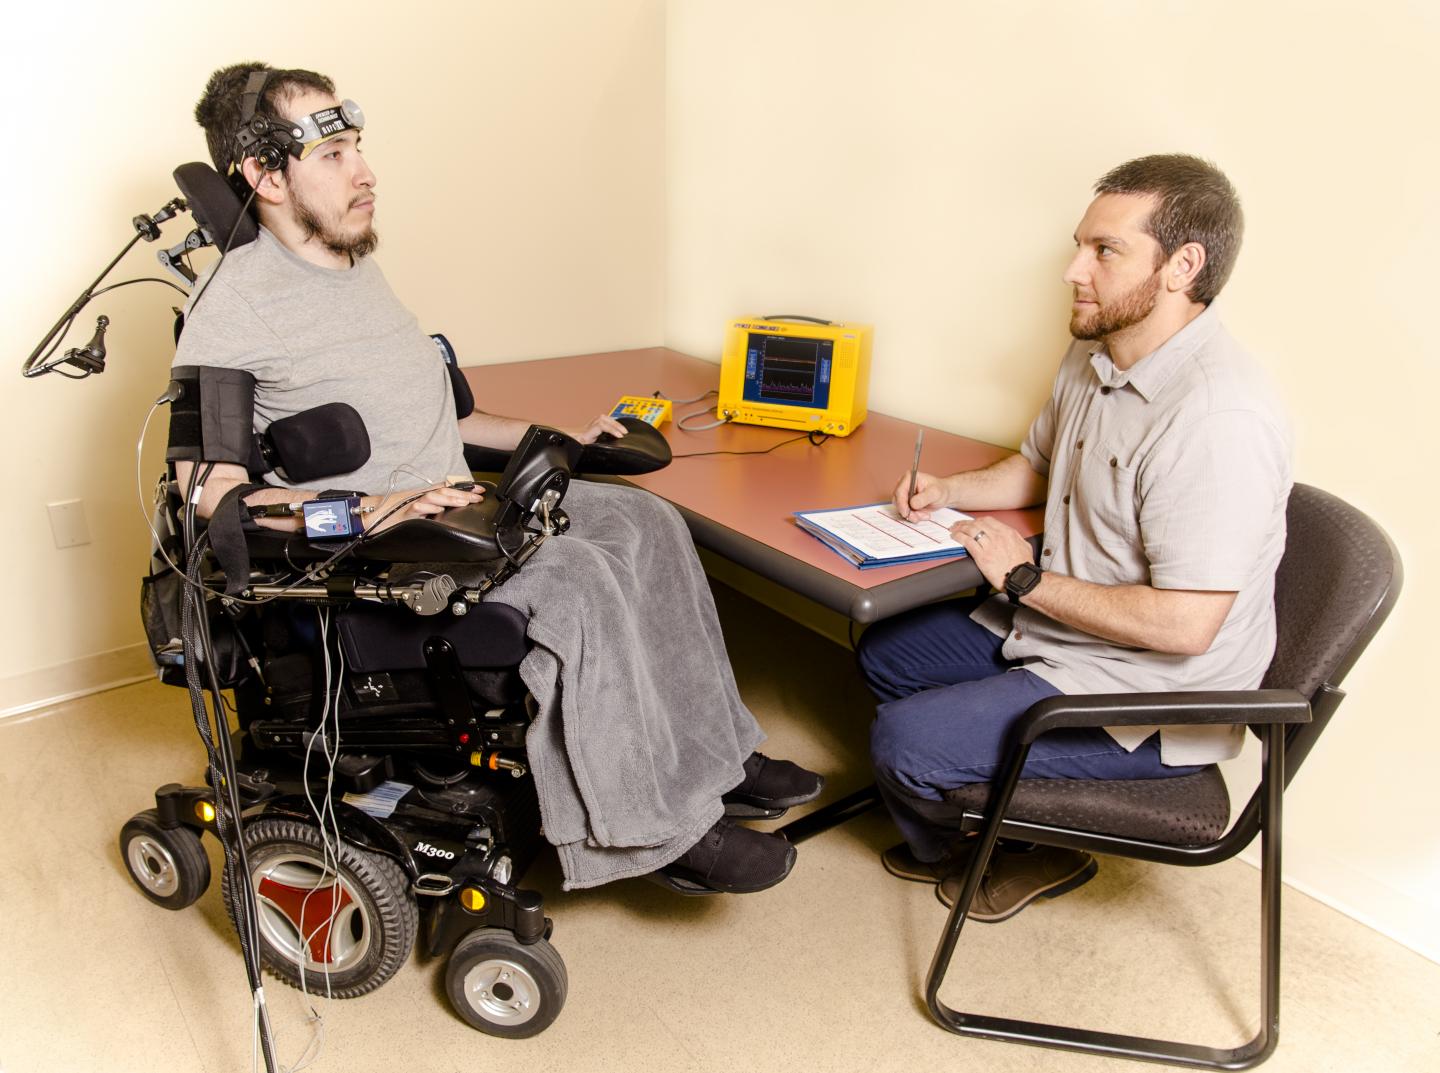 Researchers Study Factors Affecting Cognitive Changes after Spinal Cord Injury